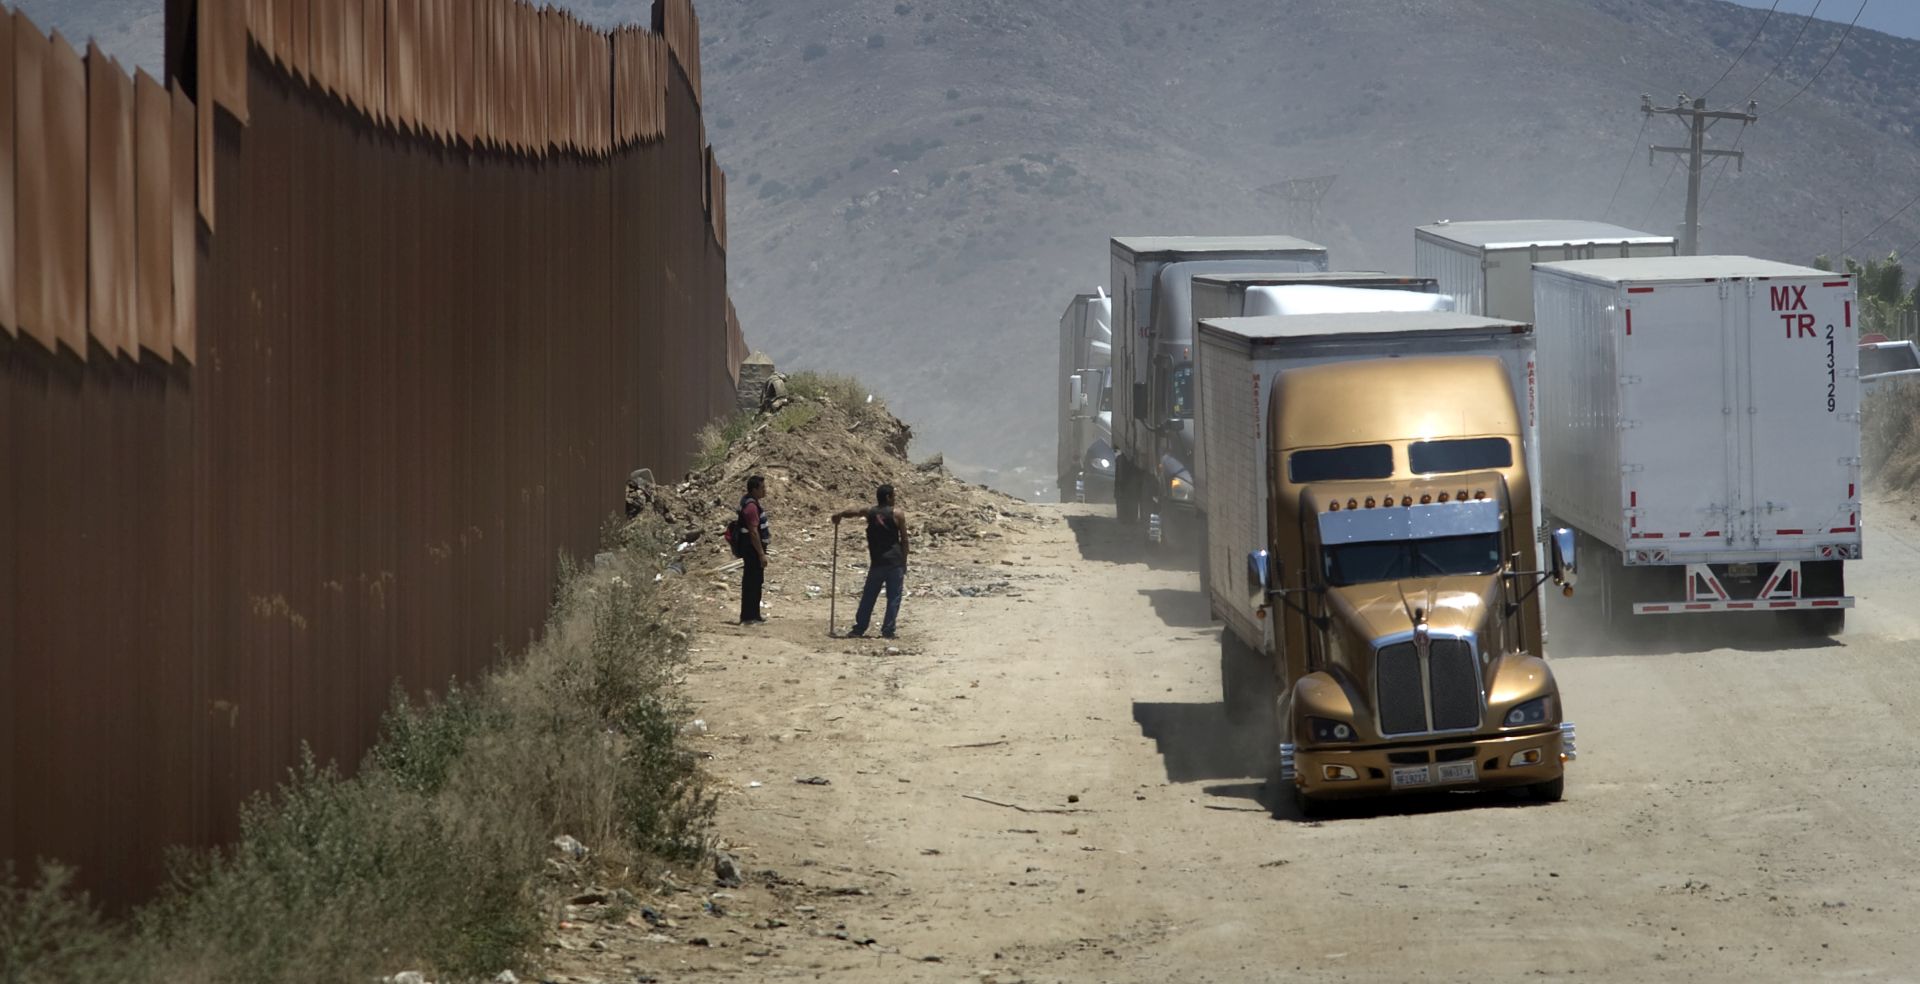 epa07626208 Two men who are fixing the road in exchange for tips watch as trucks drive along a dirt road next to the U.S.-Mexico border fence toward the commercial border inspection stationn in Tijuana, Mexico, on 04 June 2019, following US President Donald J. Trump's decision to impose tariffs on Mexico. The truck will queue in line with several hundred other trucks waiting to cross the border into San Diego, California, USA. US President Donald J. Trump stated he is planning to implement his decision to impose five percent tariffs on goods imported into the US from Mexico, with a five percent increase each month until October, if Mexican officials do not stop undocumented migrants from crossing into the US from the two nation's shared border.  EPA/David Maung